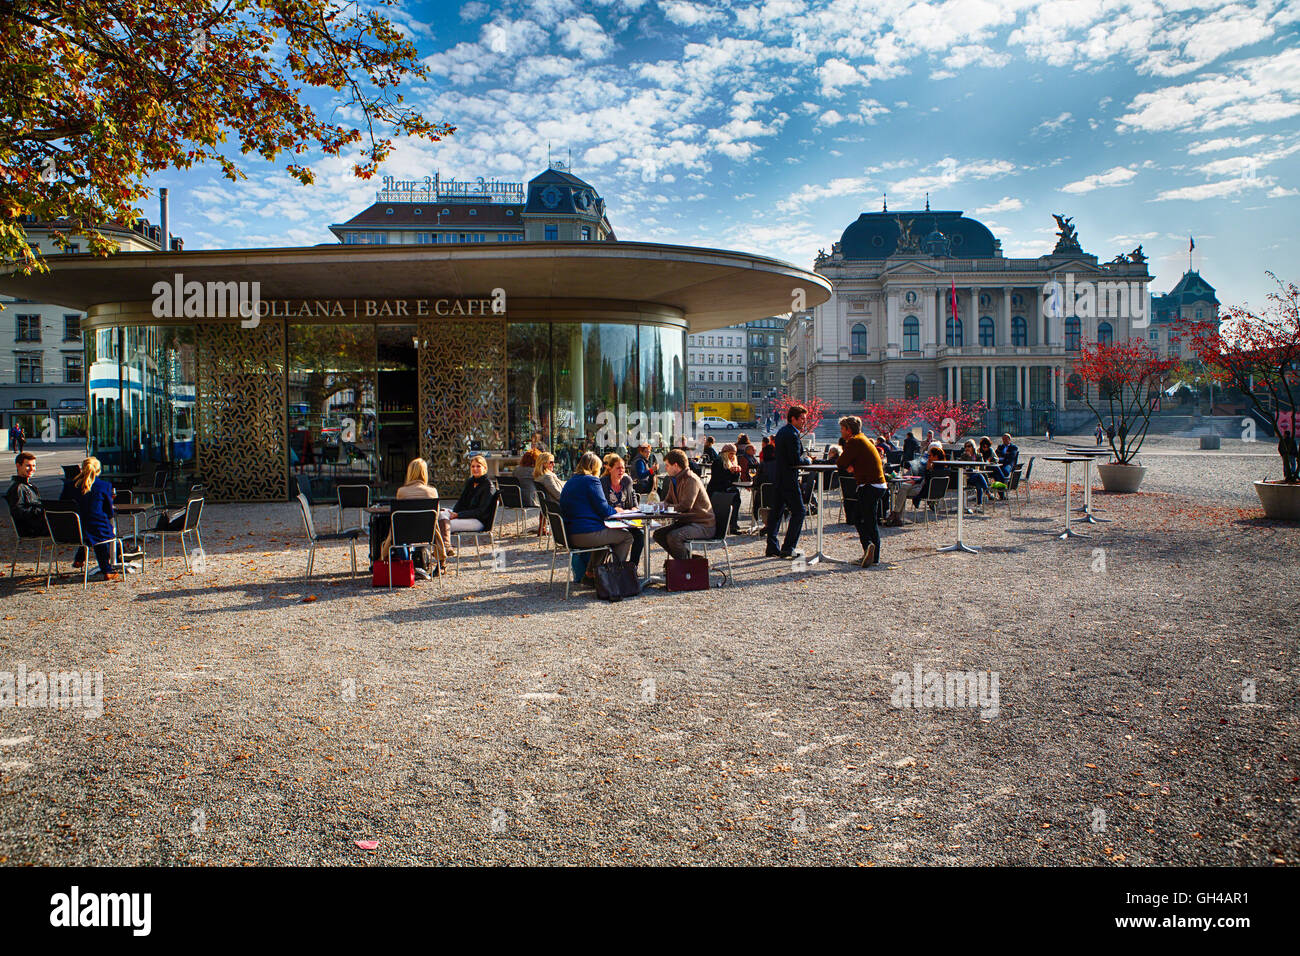 People Enjoying a Coffee or Tea Outdoors in a Square Early Fall, Theater Strasse, Zurich, Switzerland Stock Photo